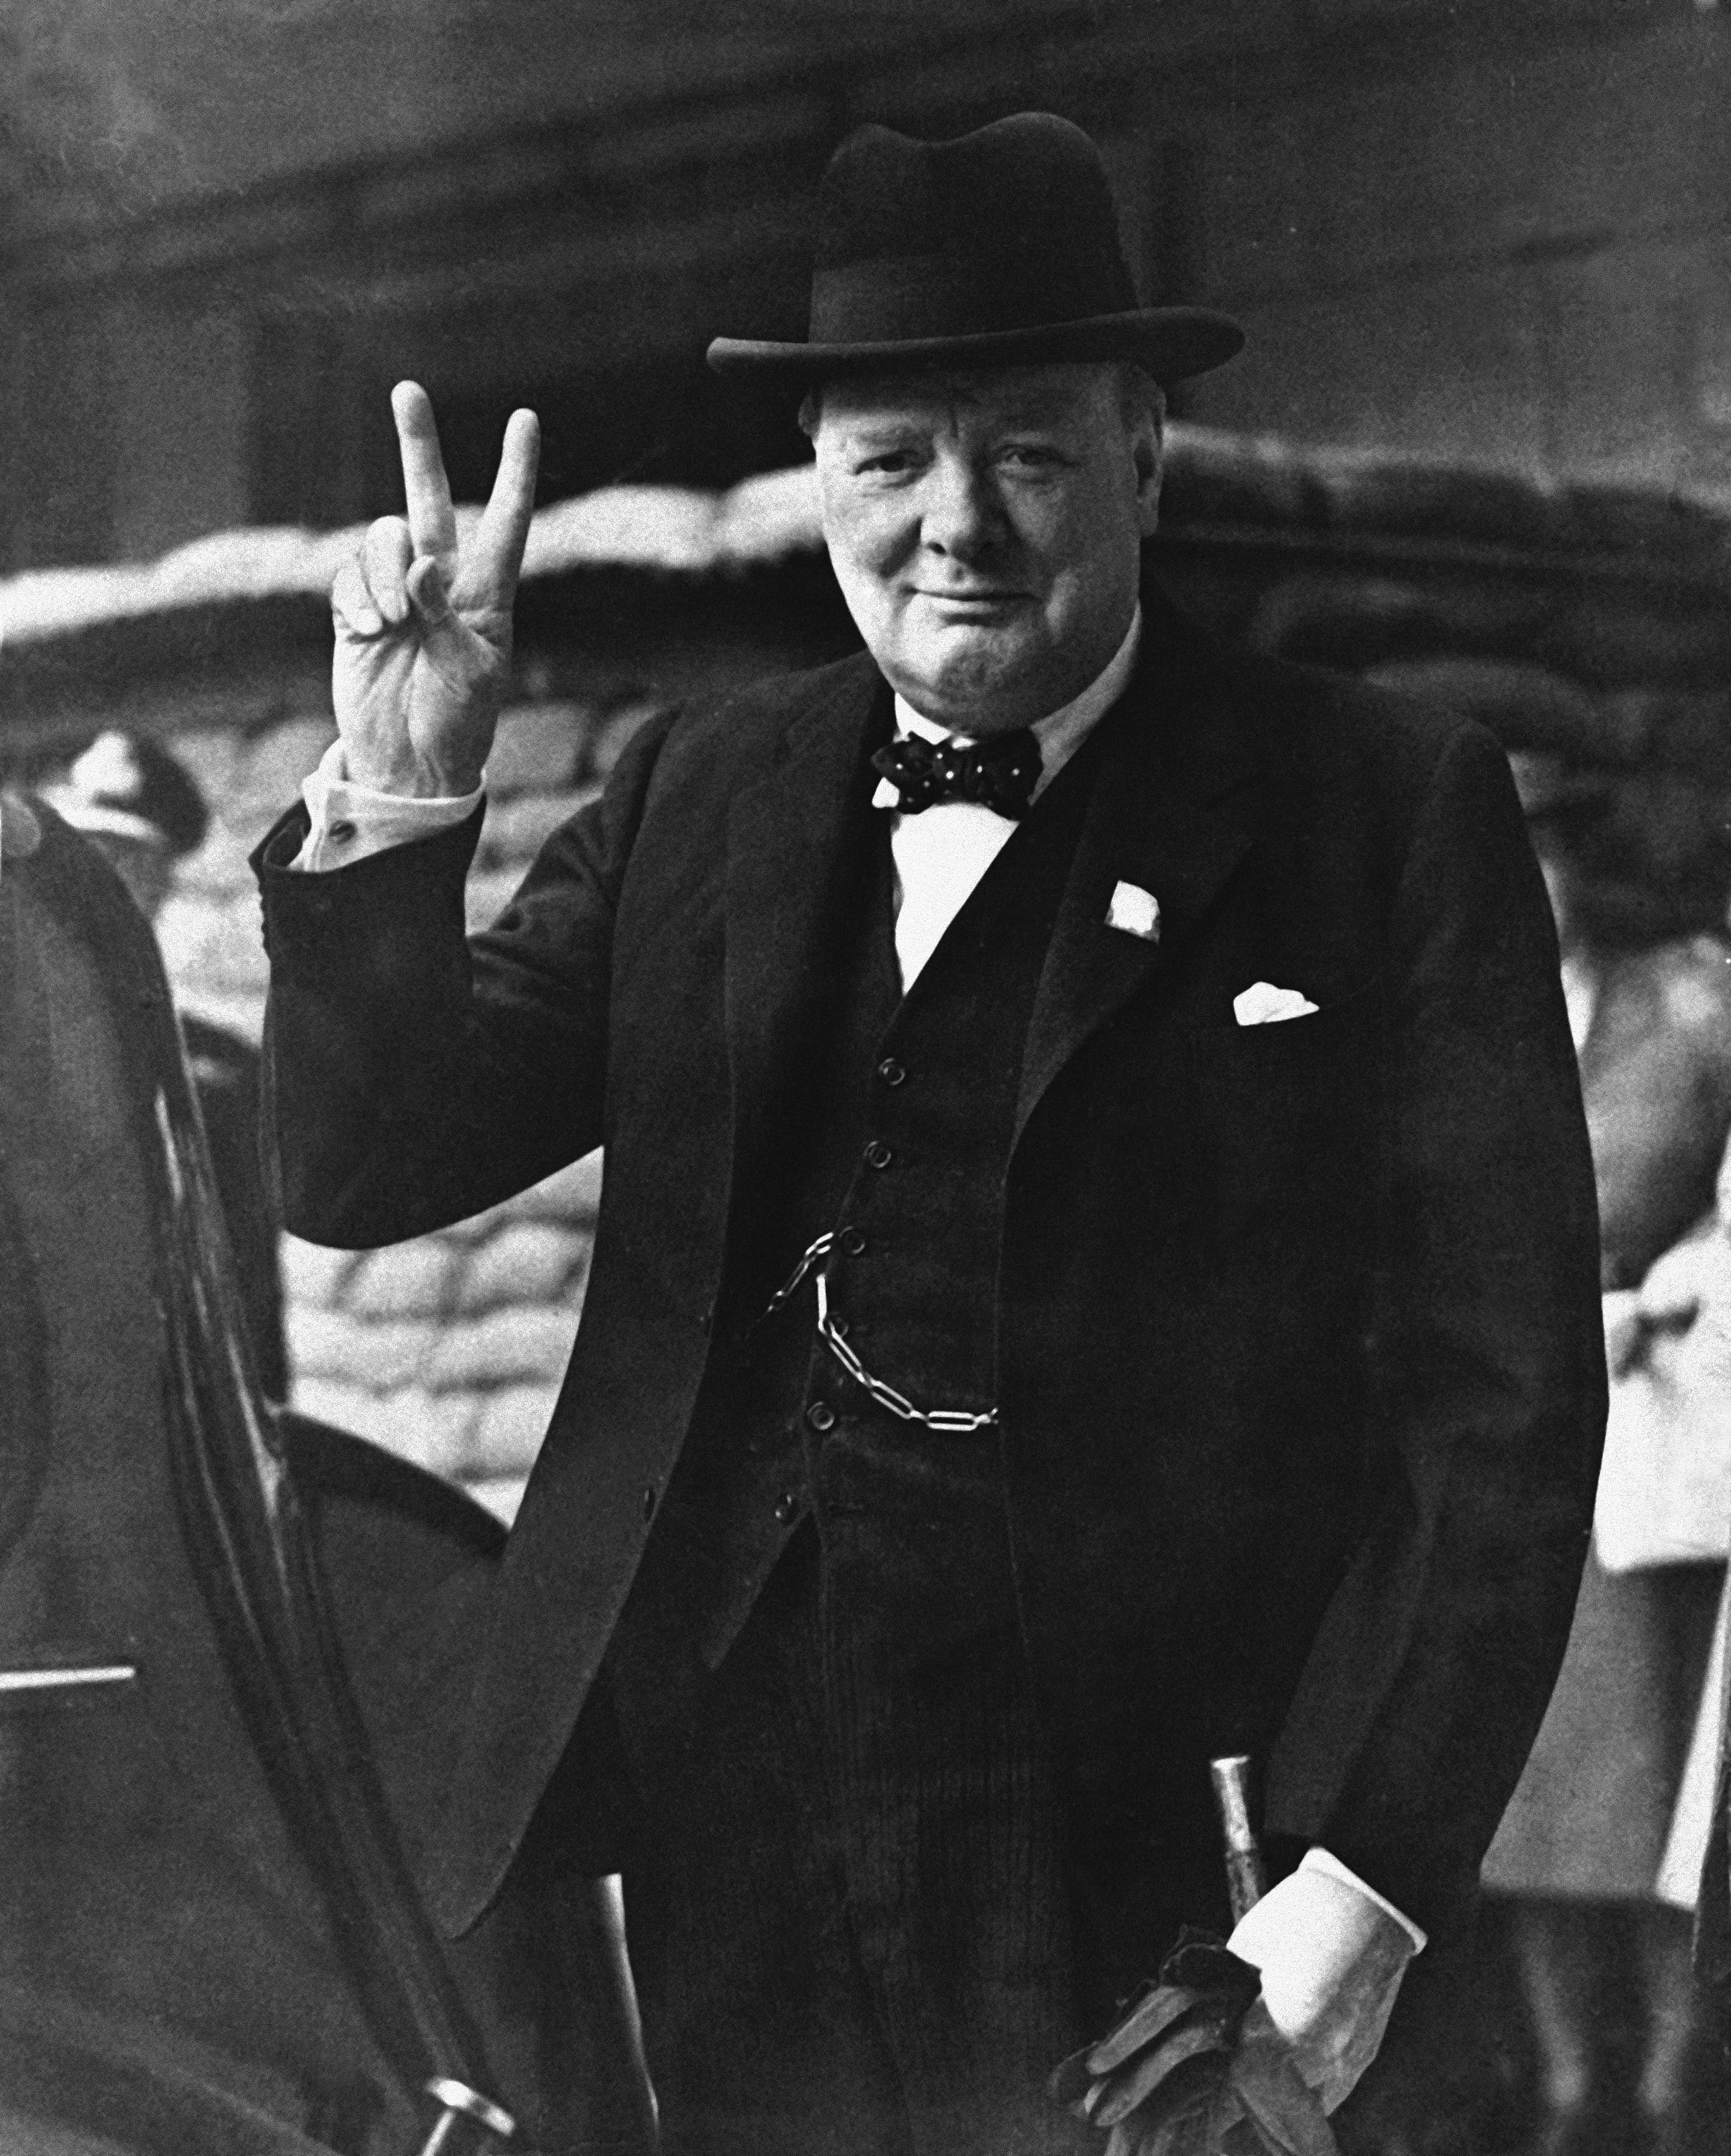 Winston Churchill was paid $250 for a lecture in Cincinnati on this date in 1901